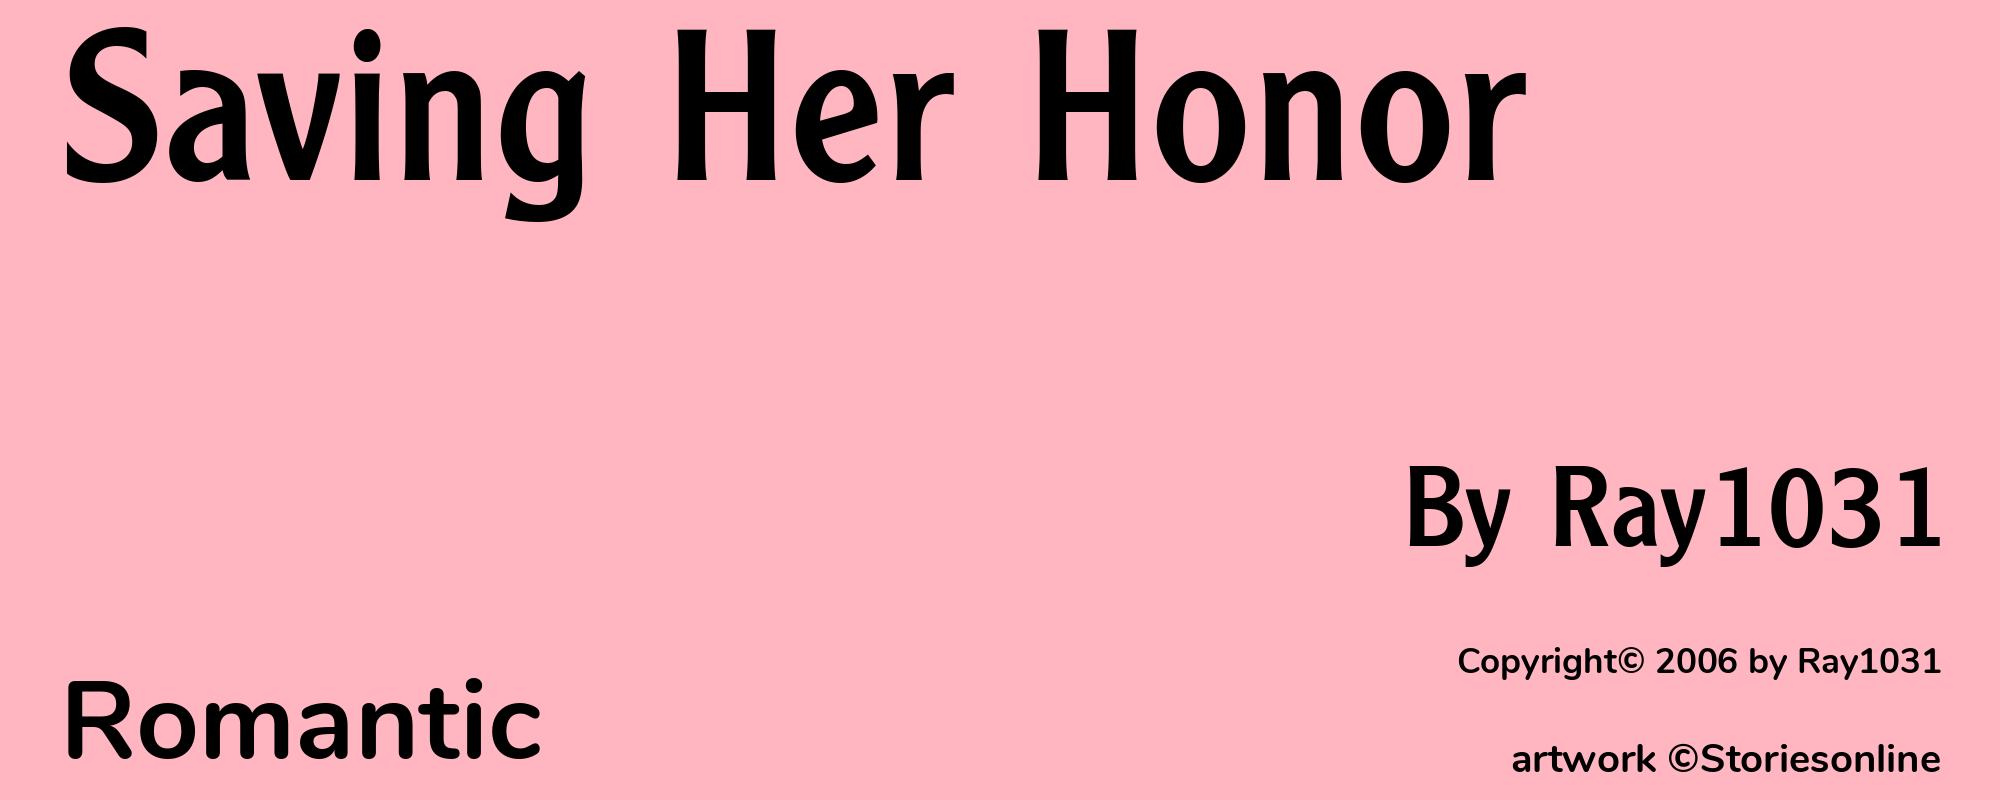 Saving Her Honor - Cover